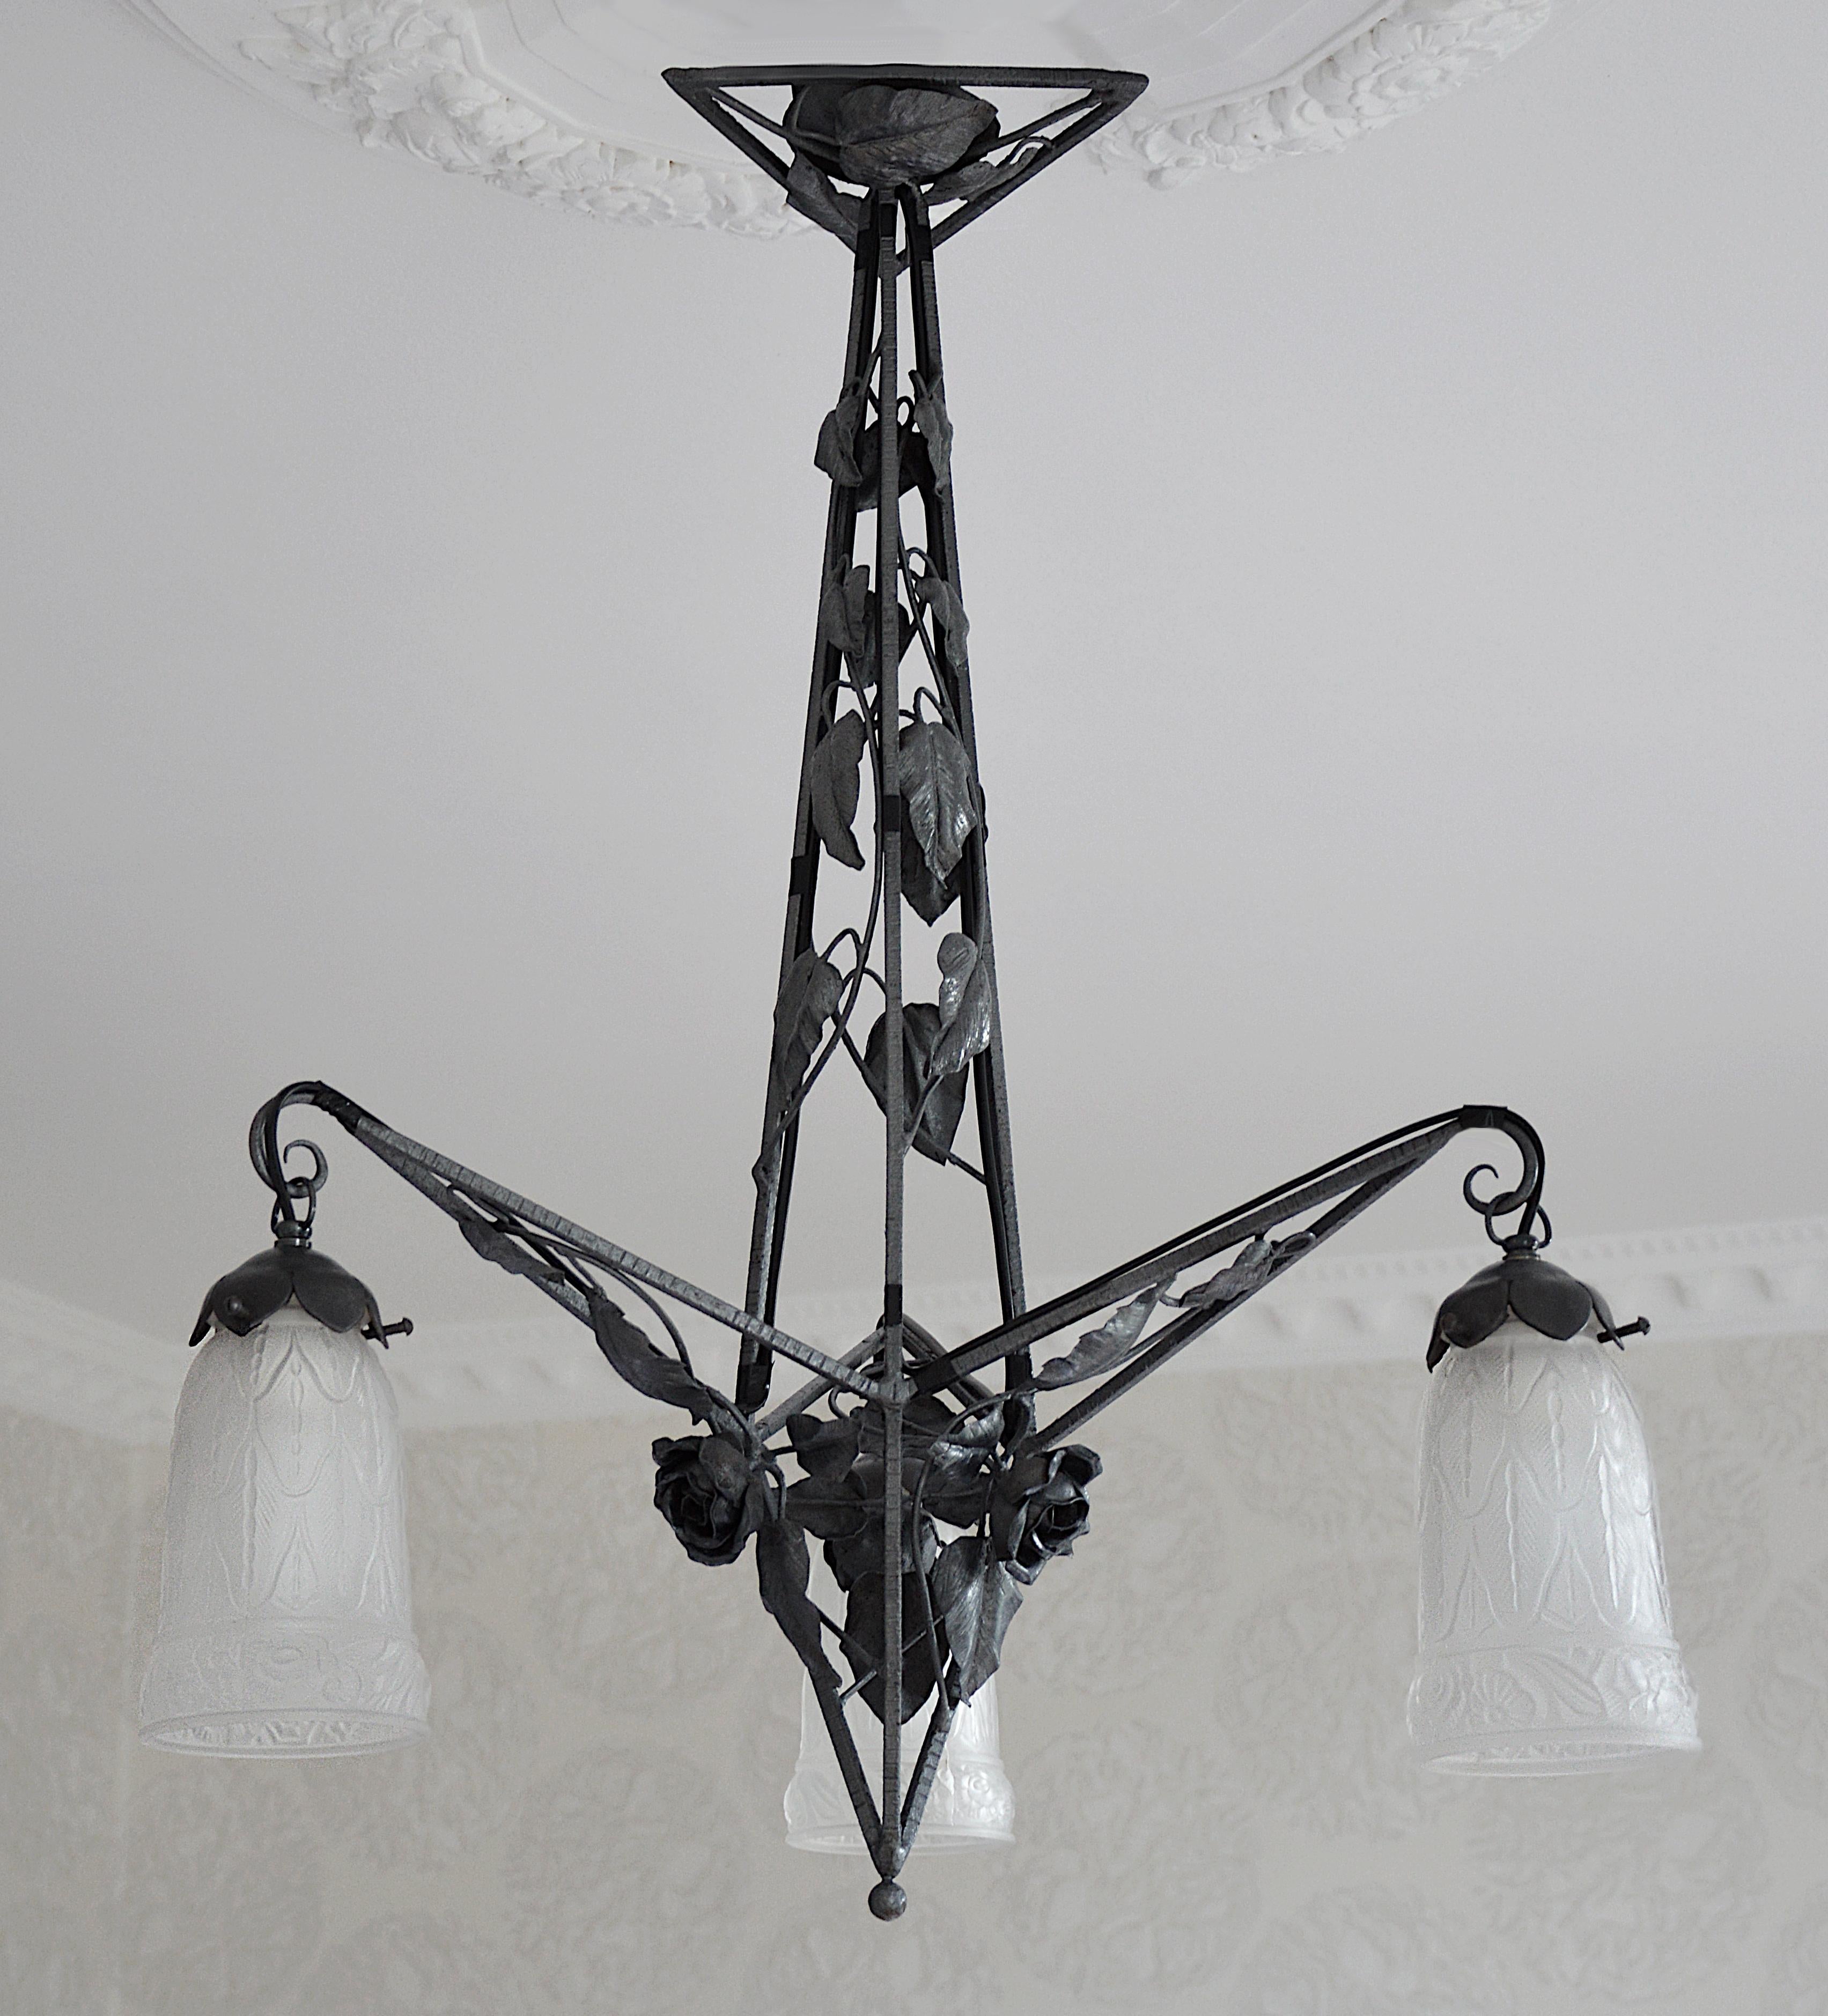 French Art Deco chandelier by Petitot (Paris), France, circa 1925. Frosted glass and wrought iron. 3 stylized frosted glass shades. Wrought iron fixture. Size: Height 26.4